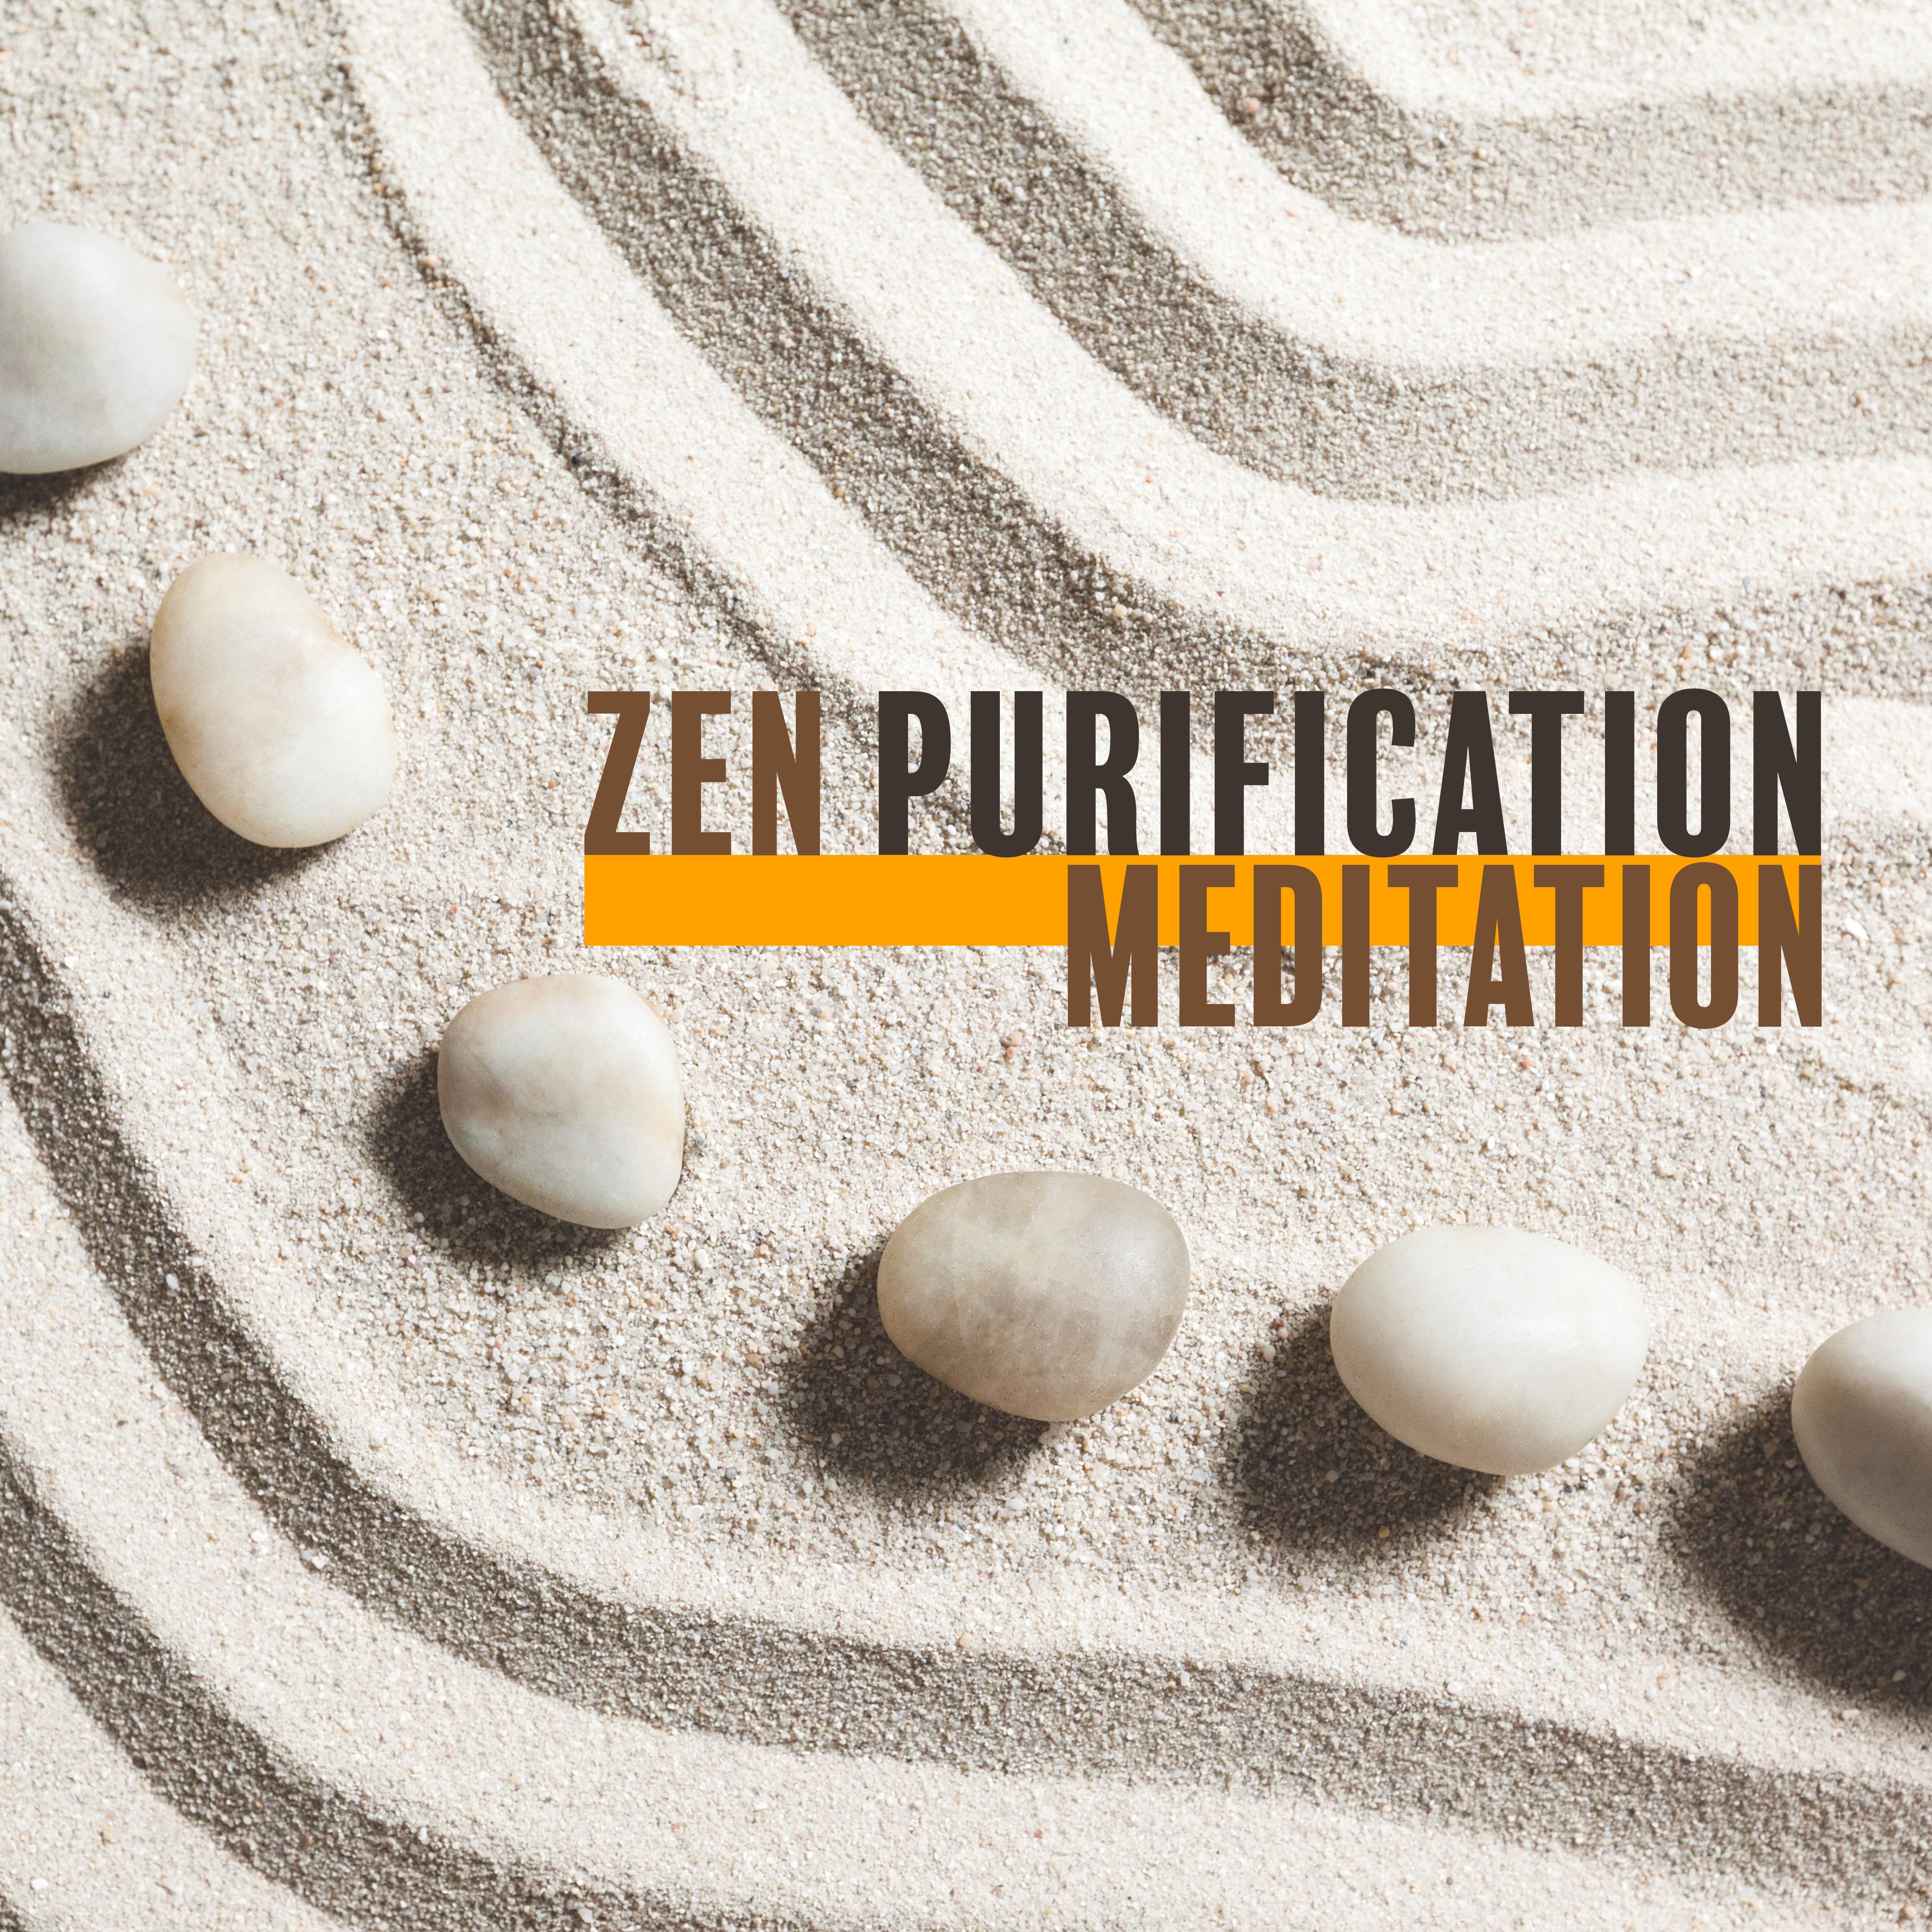 Zen Purification Meditation – Selection of 2019 New Age Music for Deepest Yoga Experience, Journey into Yourself, Open Your Body & Mind, Third Eye Meditation, Chakra Balancing